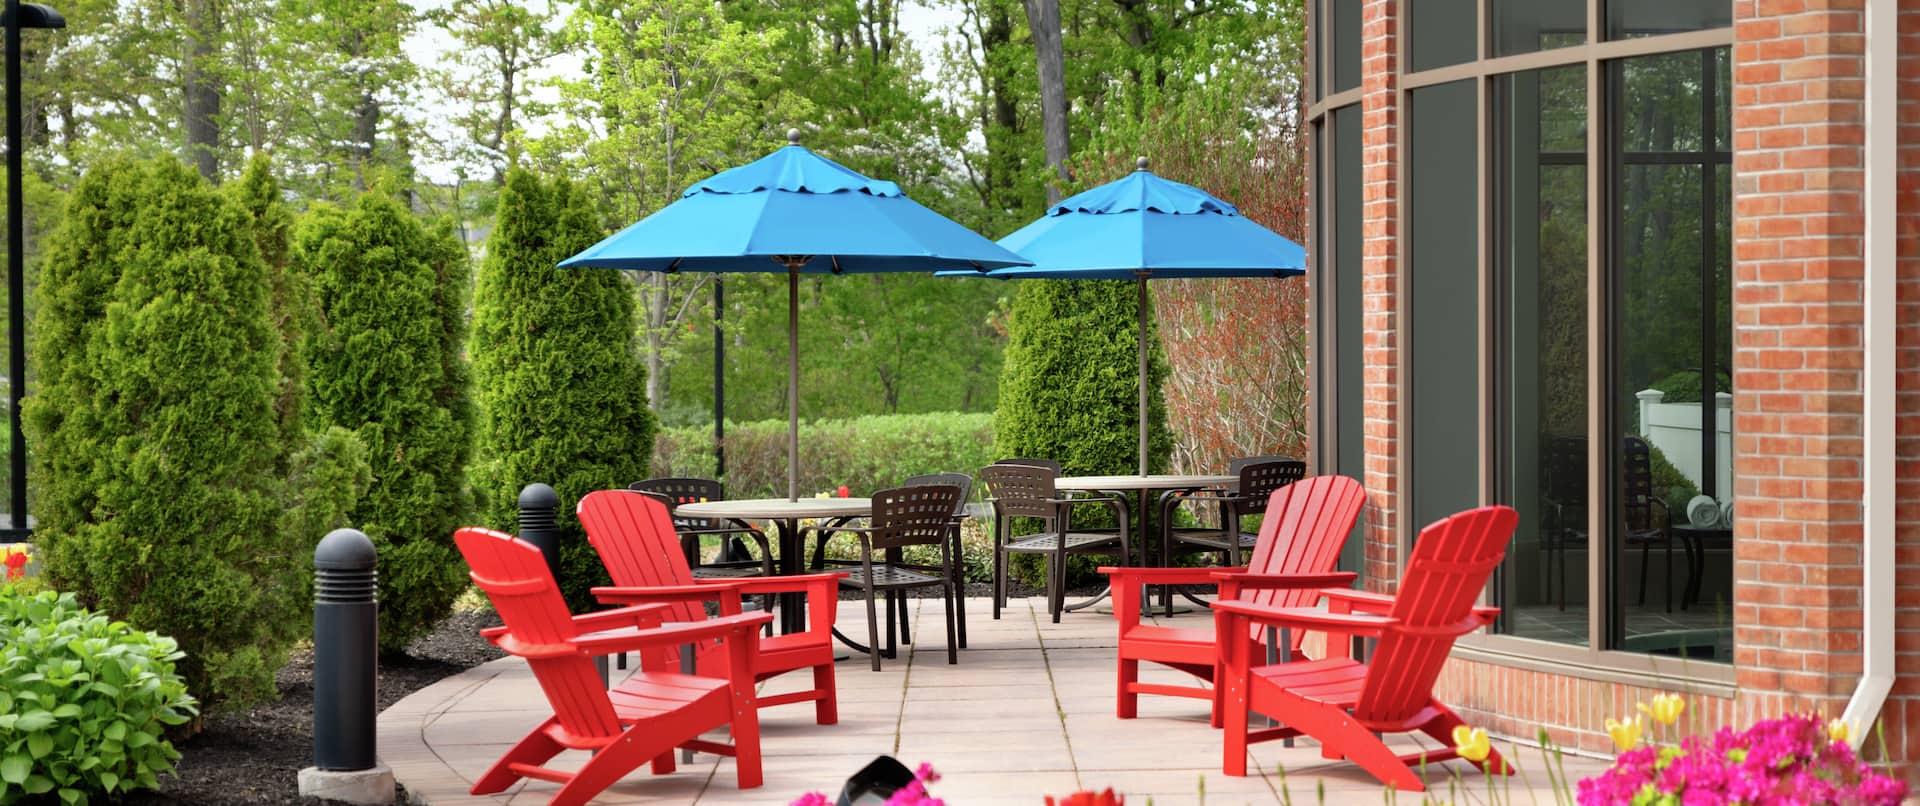 Beautiful outdoor patio area featuring lush trees, ample seating, and view of indoor pool.